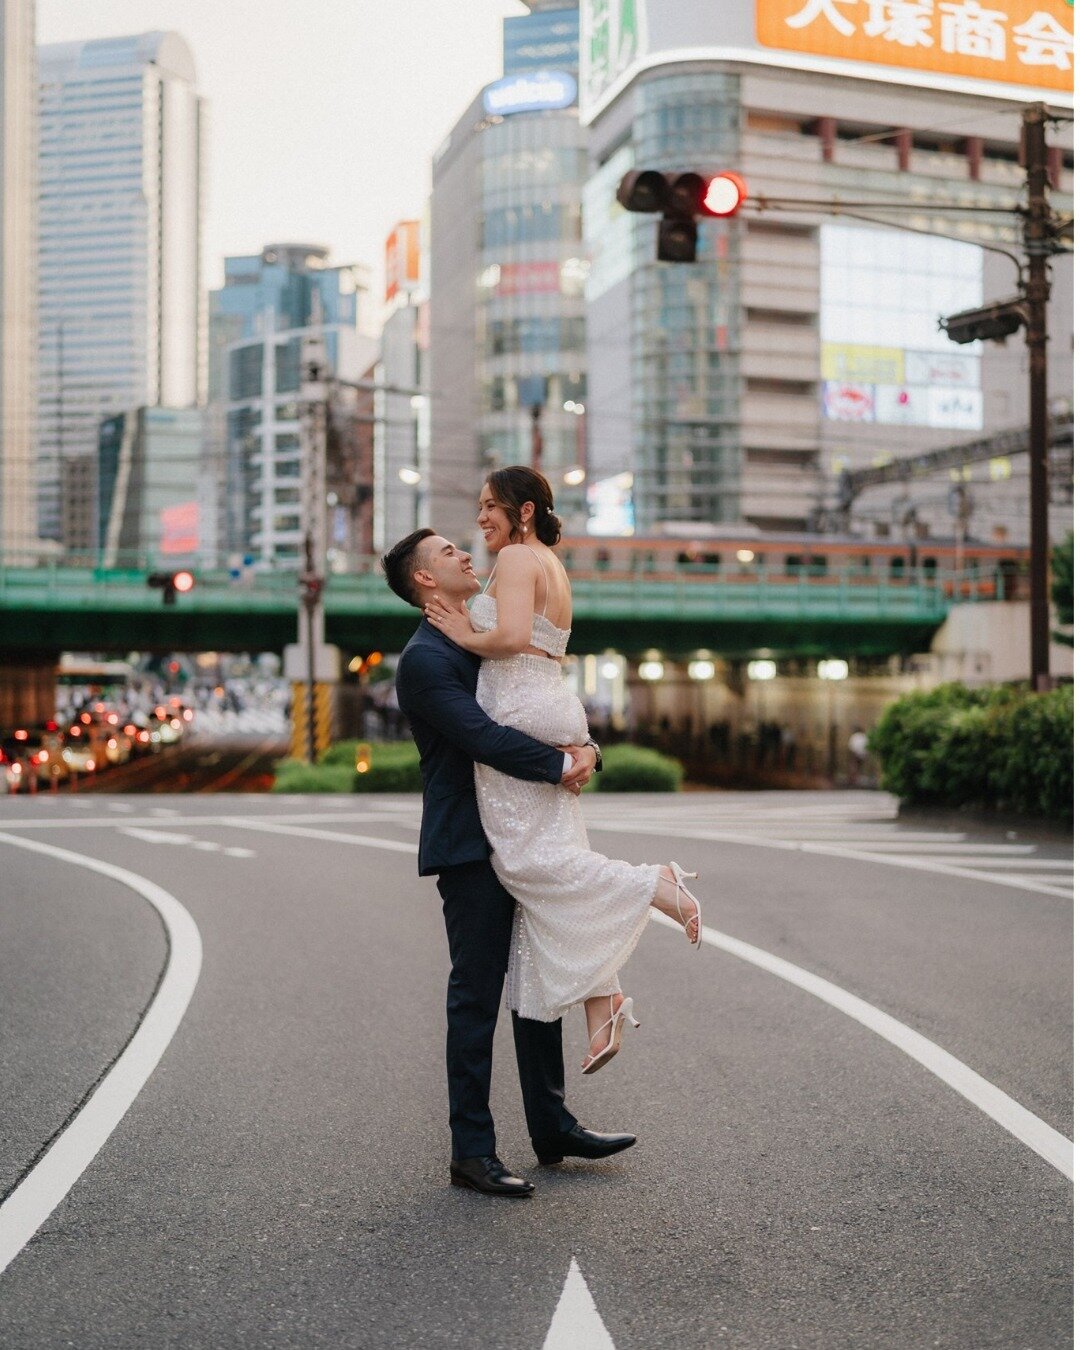 From serene gardens to vibrant city lights! ✨ - Part 2

M &amp; T's Tokyo wedding celebrations continued with stunning couple photos under the Tokyo skyline. The cityscape provided the perfect backdrop for their love story. Congratulations to this pe